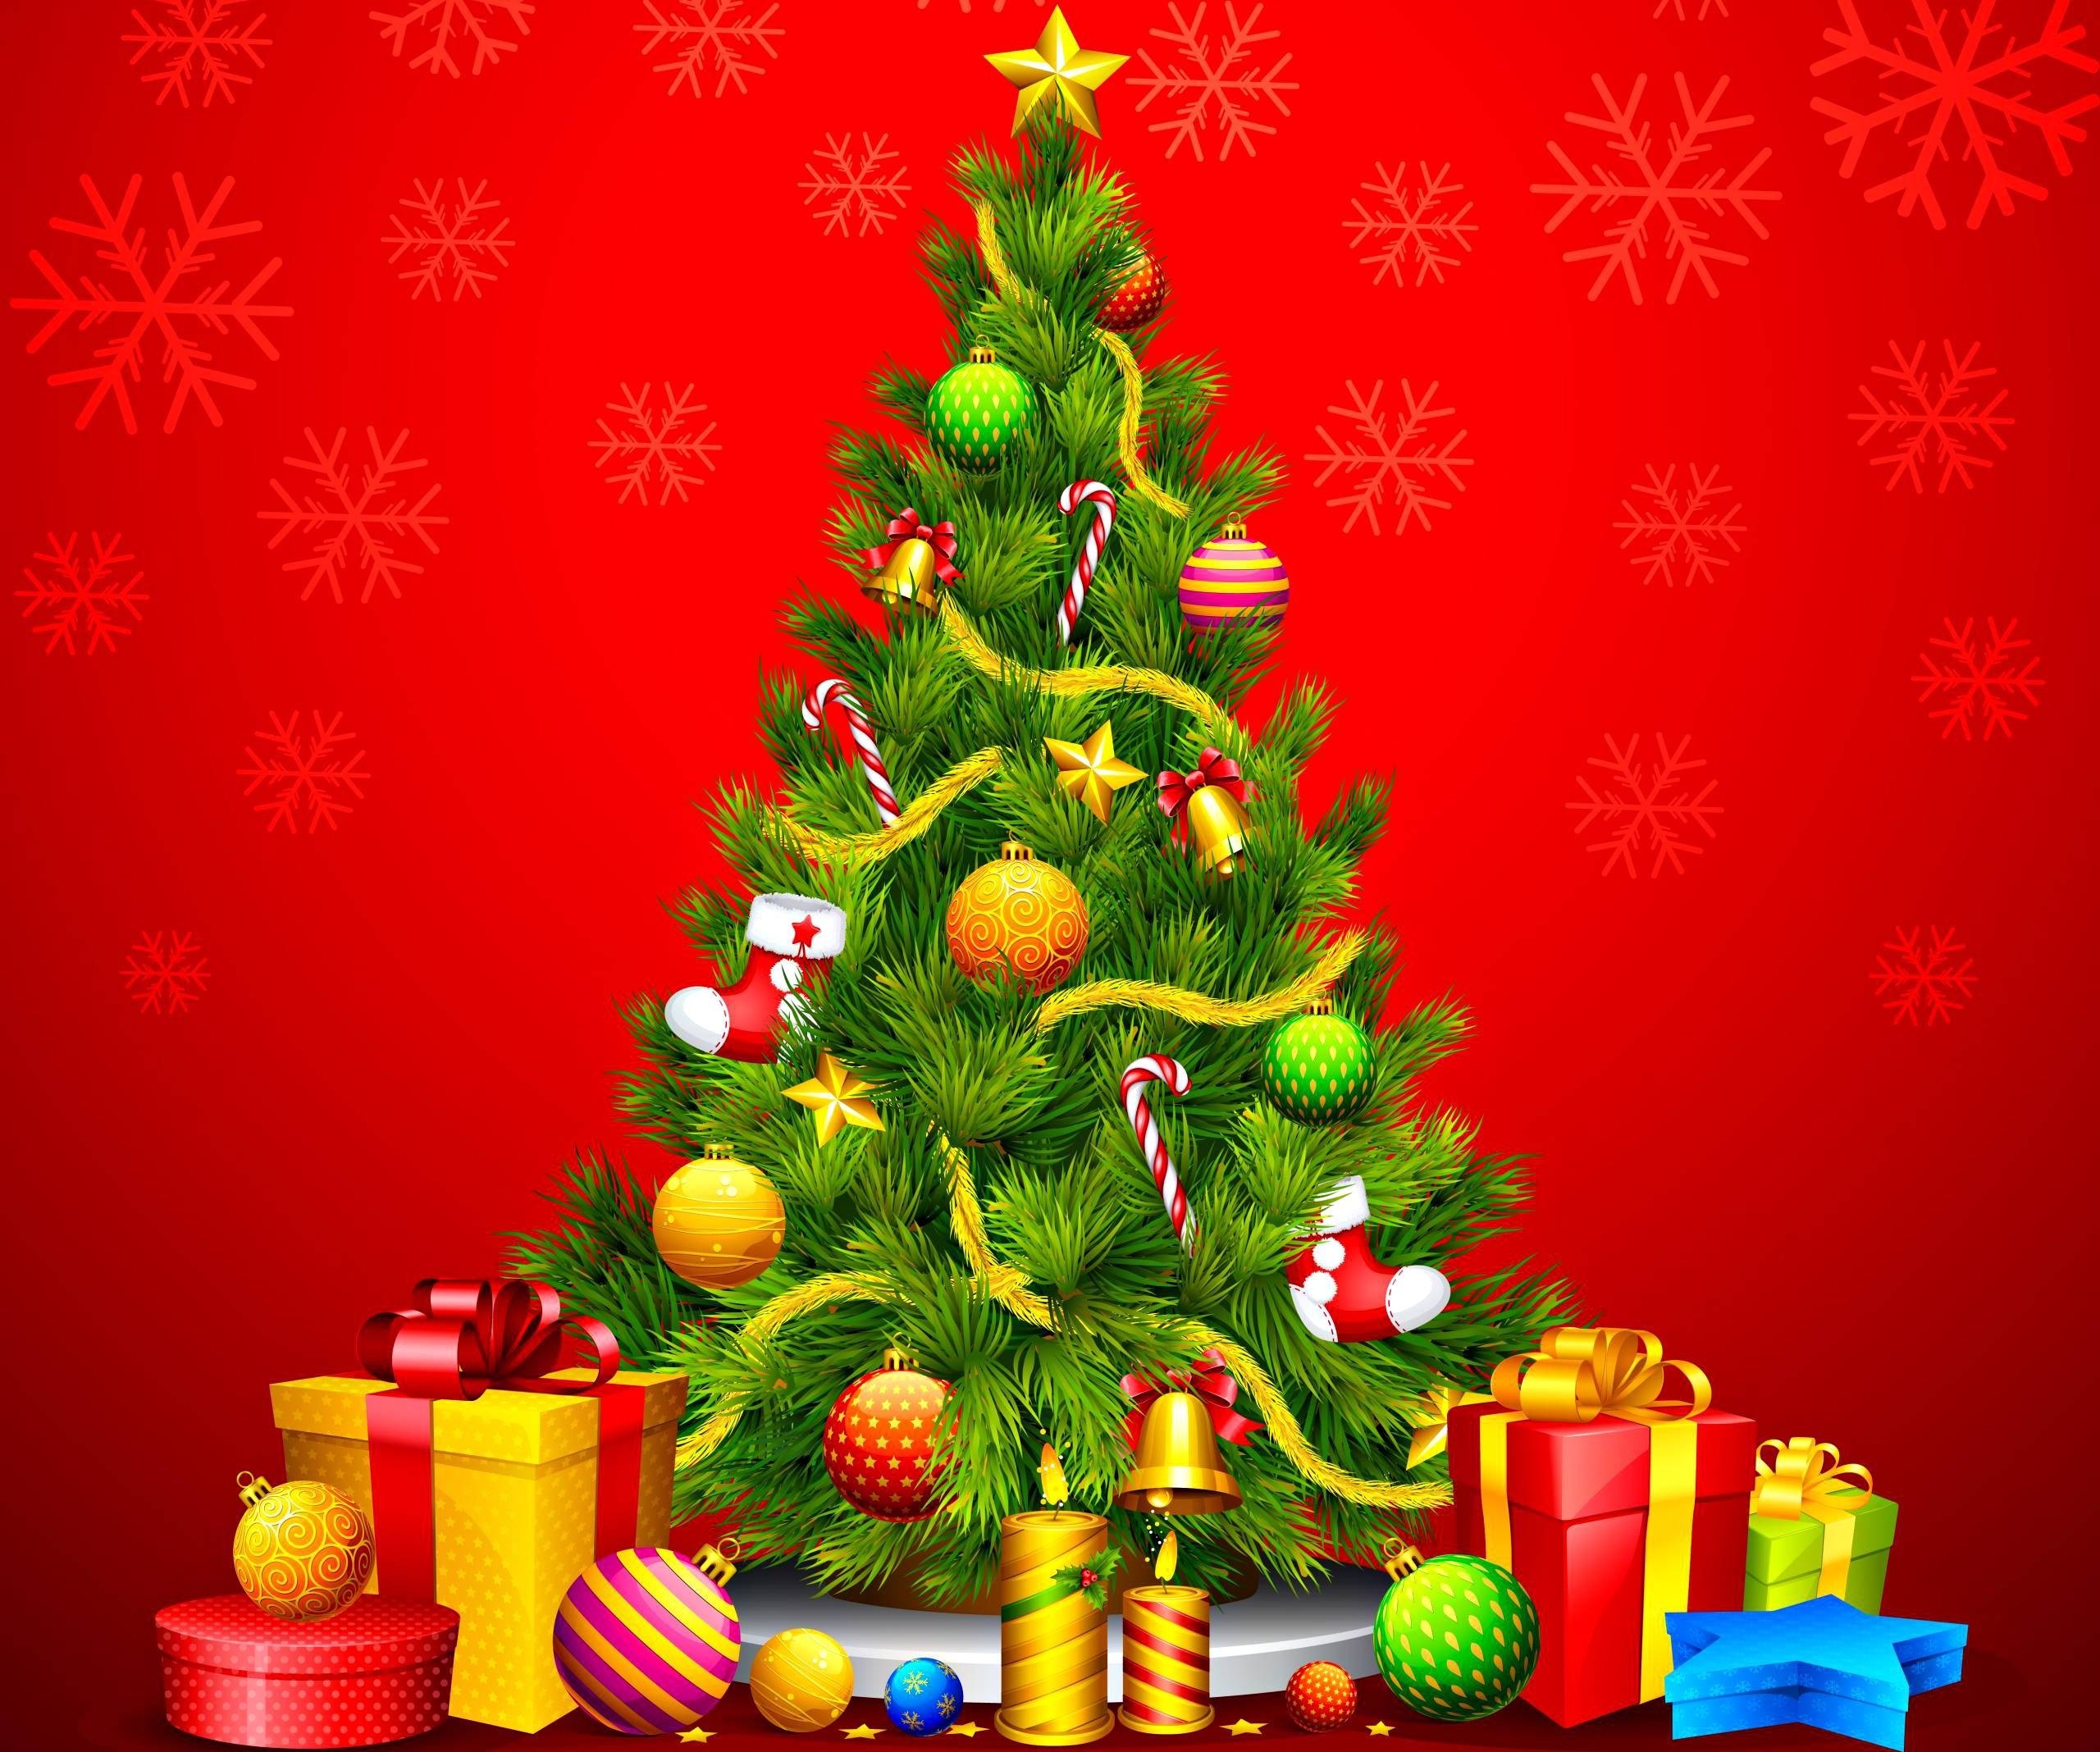 Free Christmas 3D iPhone Wallpaper in 2023 | Christmas tree wallpaper  iphone, Wallpaper iphone christmas, Christmas wallpaper